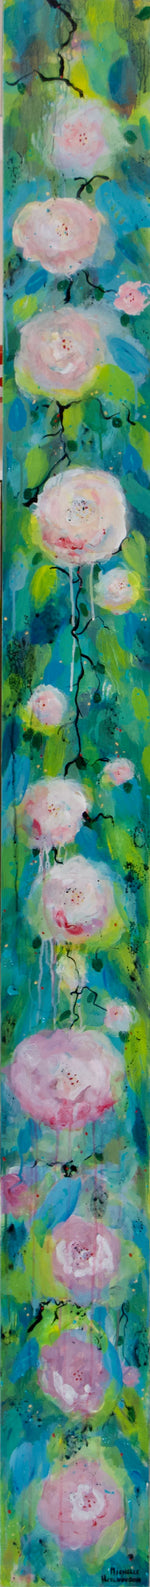 Load image into Gallery viewer, Pink and white roses set against a blue green background.
